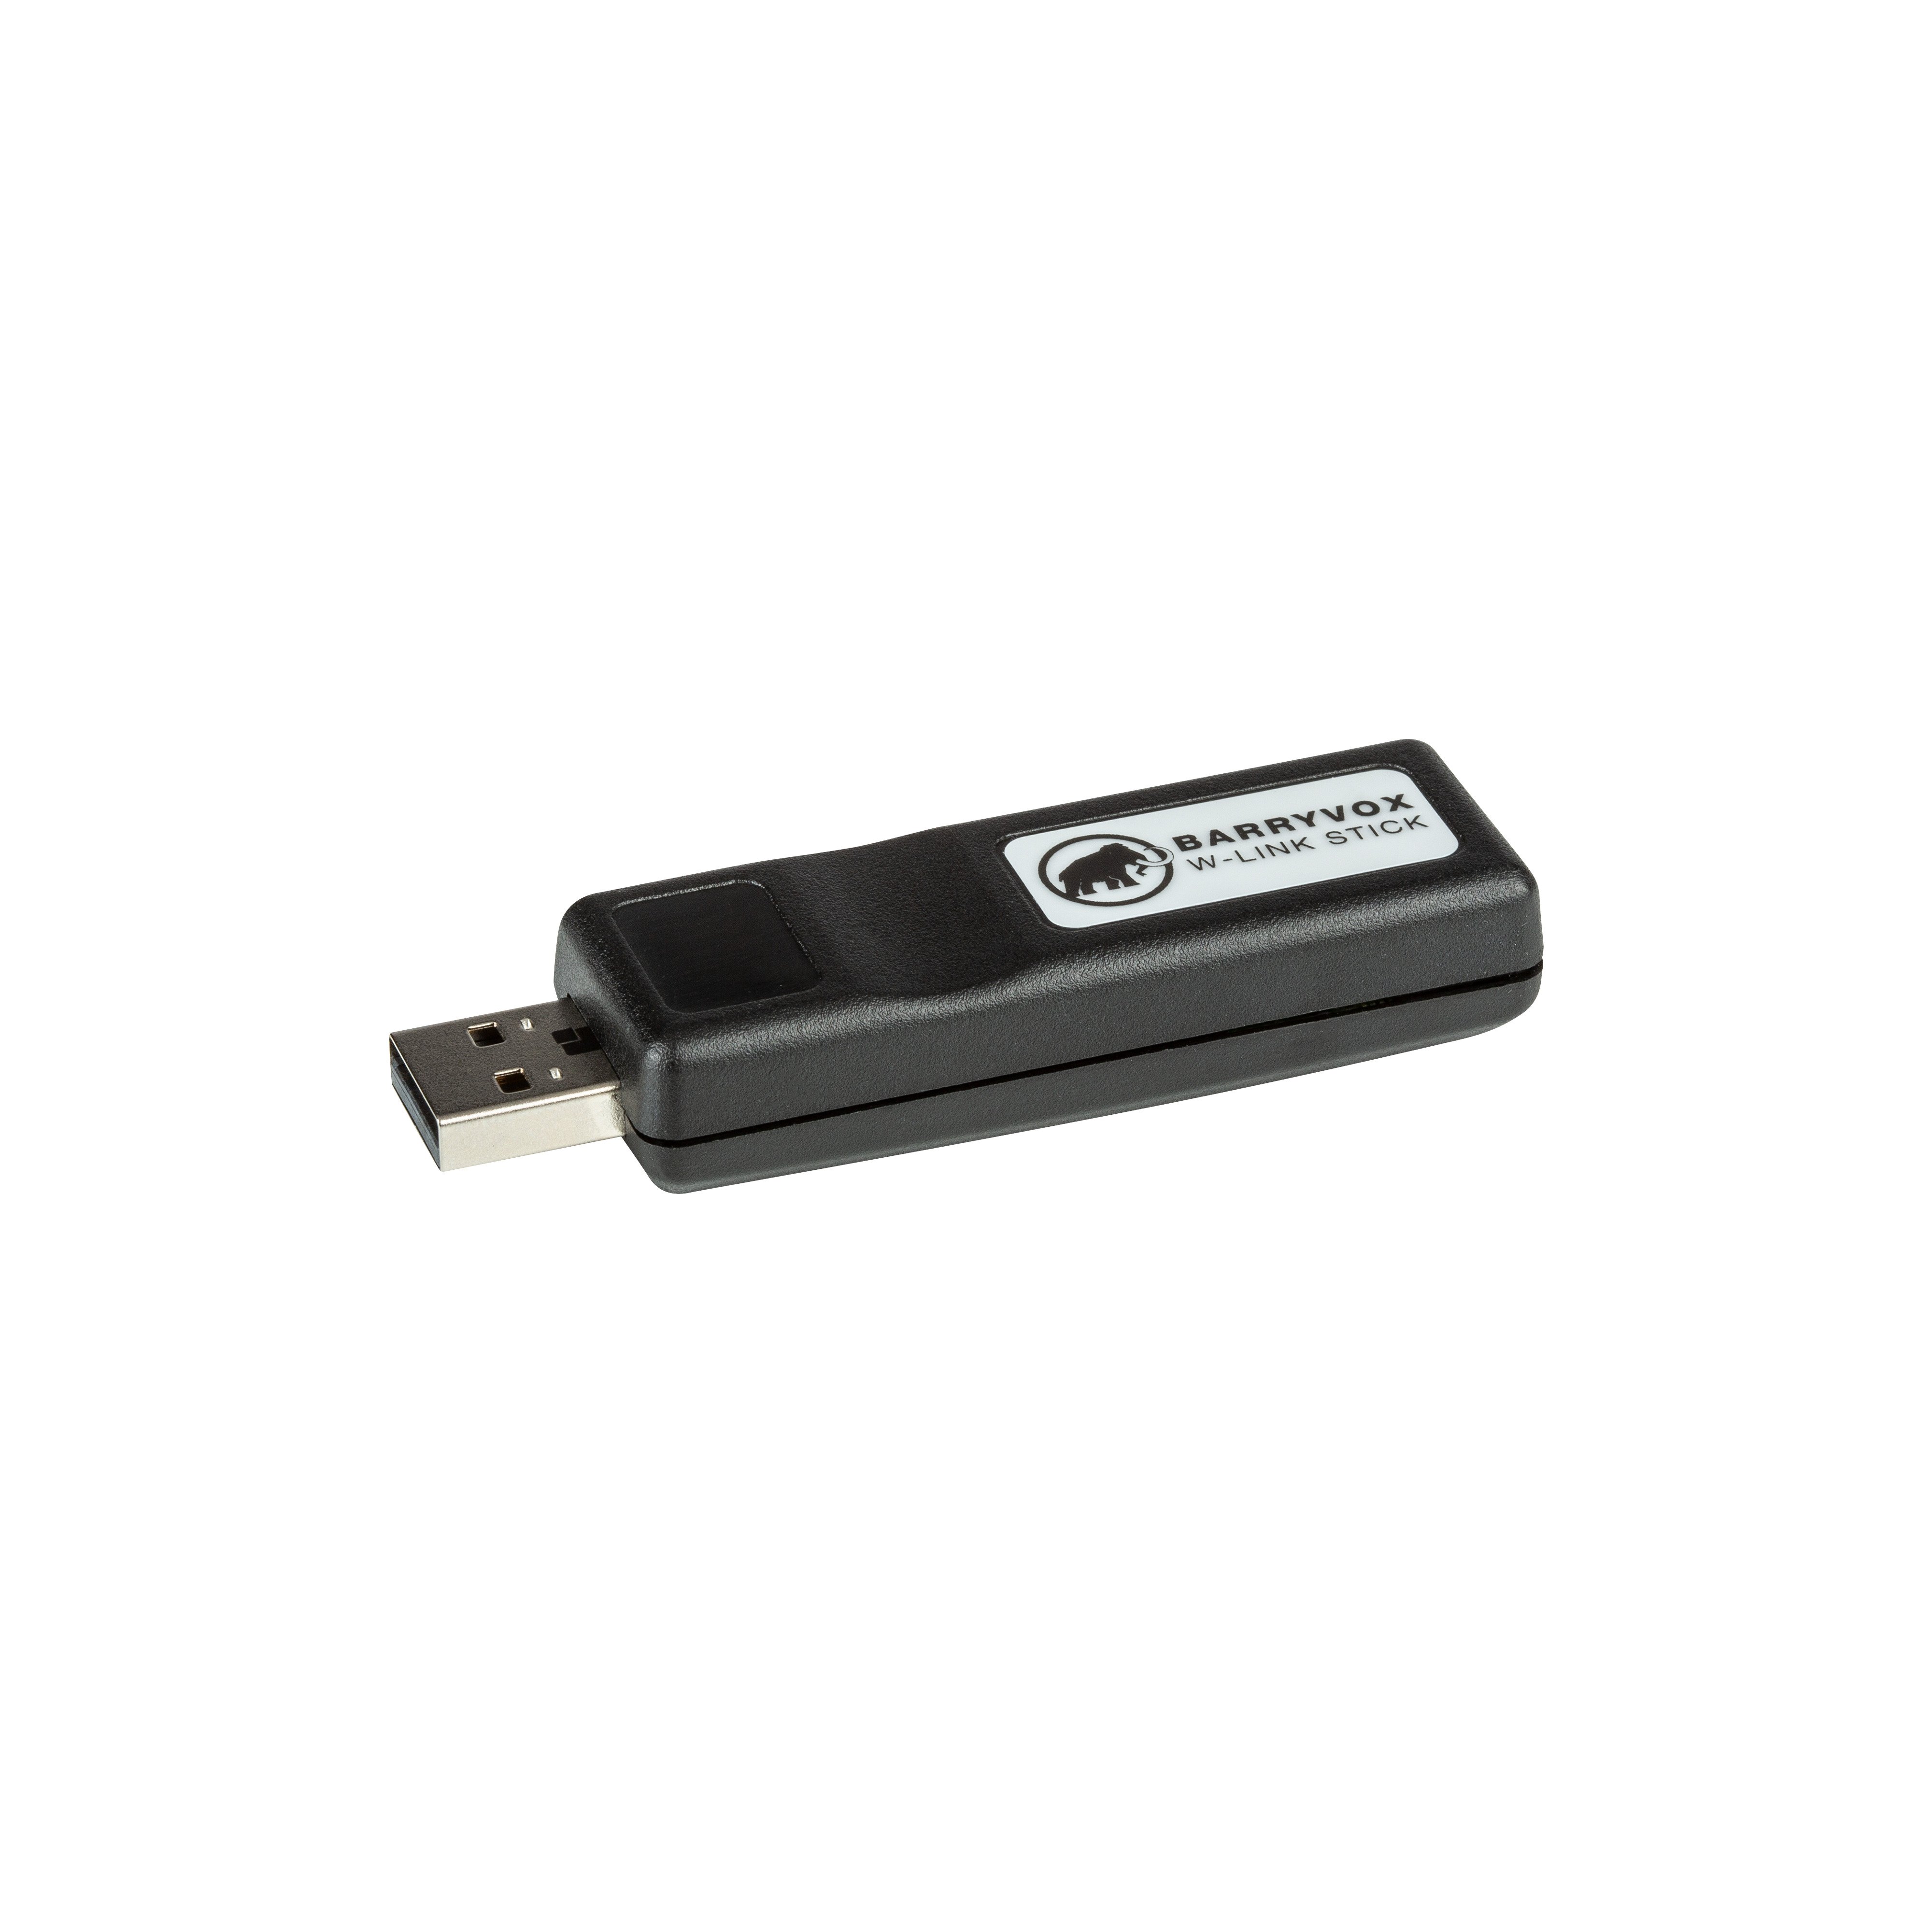 Barryvox W-Link Stick - Europe, one size product image